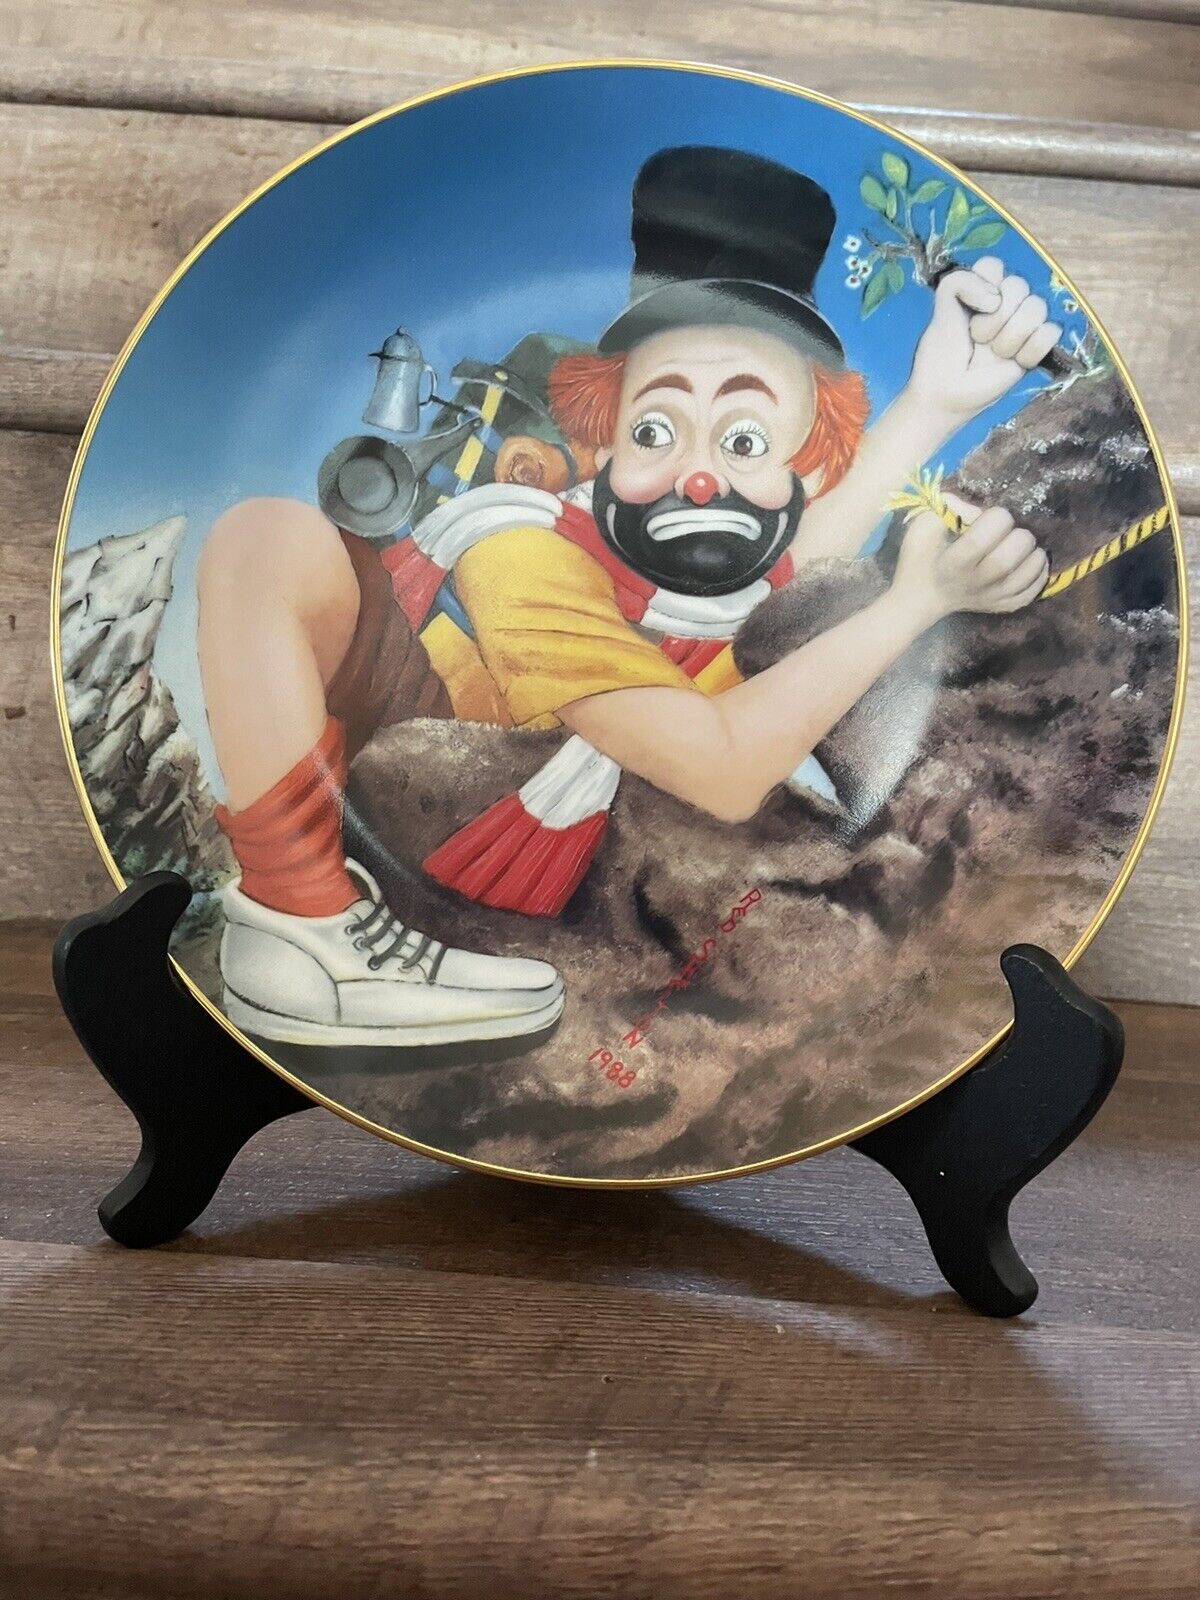 Red Skelton HAND SIGNED The Cliffhanger 1988 ARMSTRONG PORCELAIN PLATE AUTOGRAPH